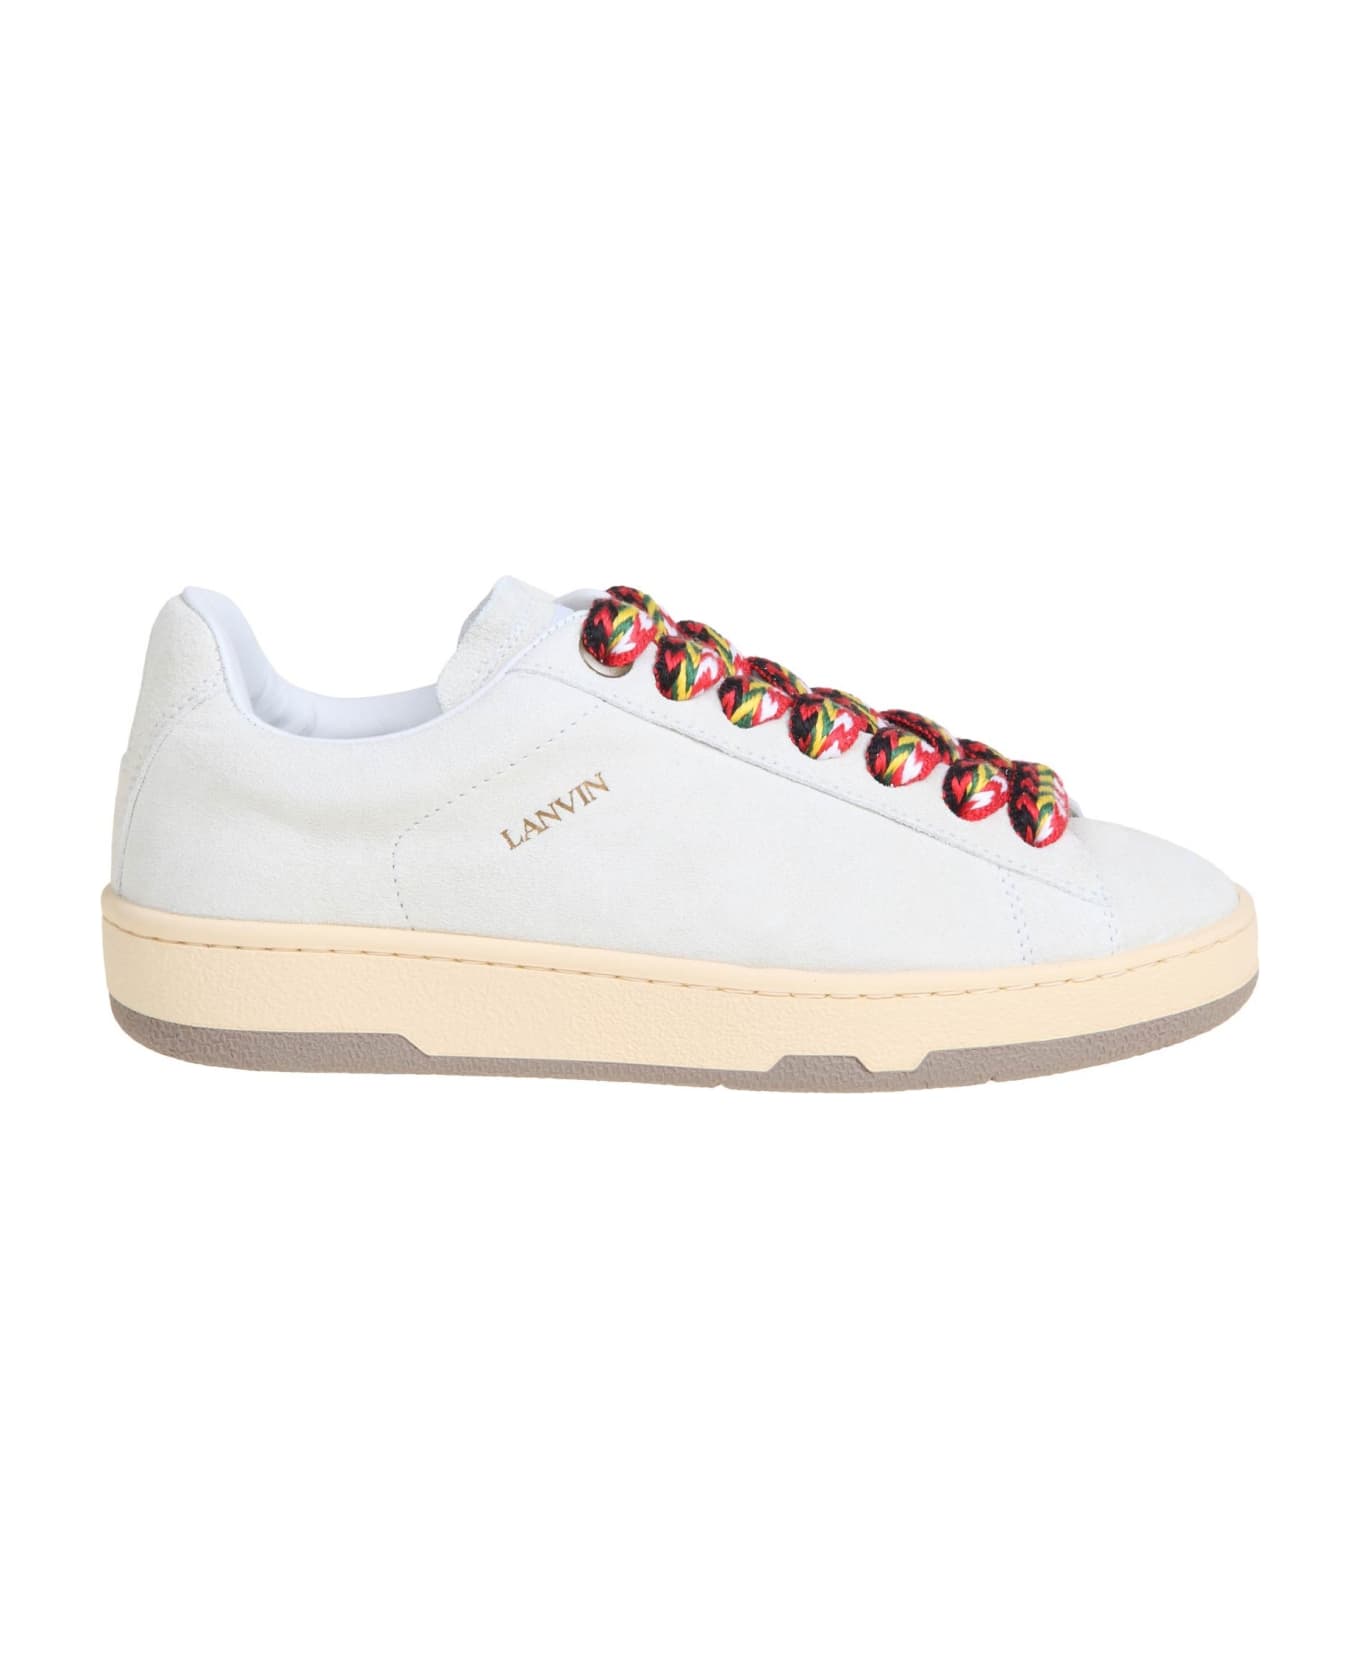 Lanvin Lite Curb Sneakers In Leather Color White - White スニーカー